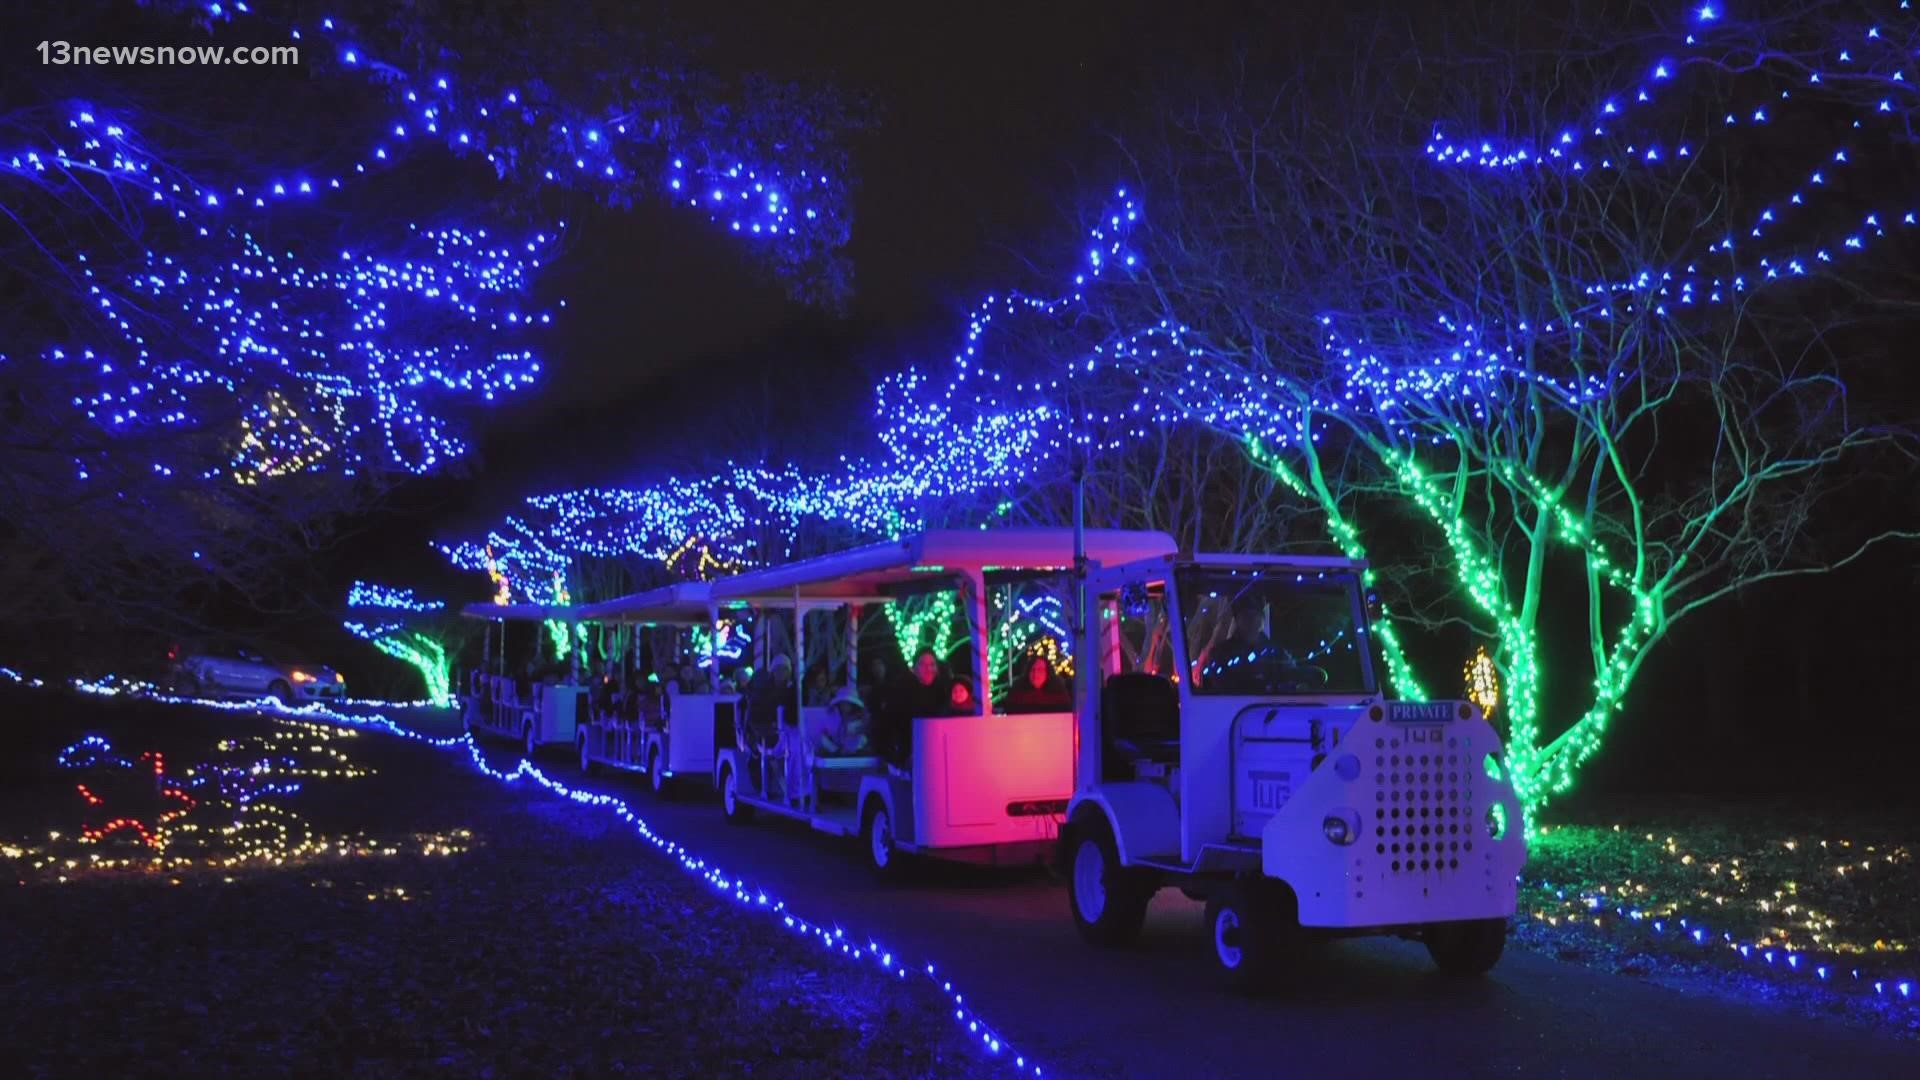 This week you can walk through Norfolk Botanical Garden surrounded by more than a million twinkling lights in its annual Garden of Lights!